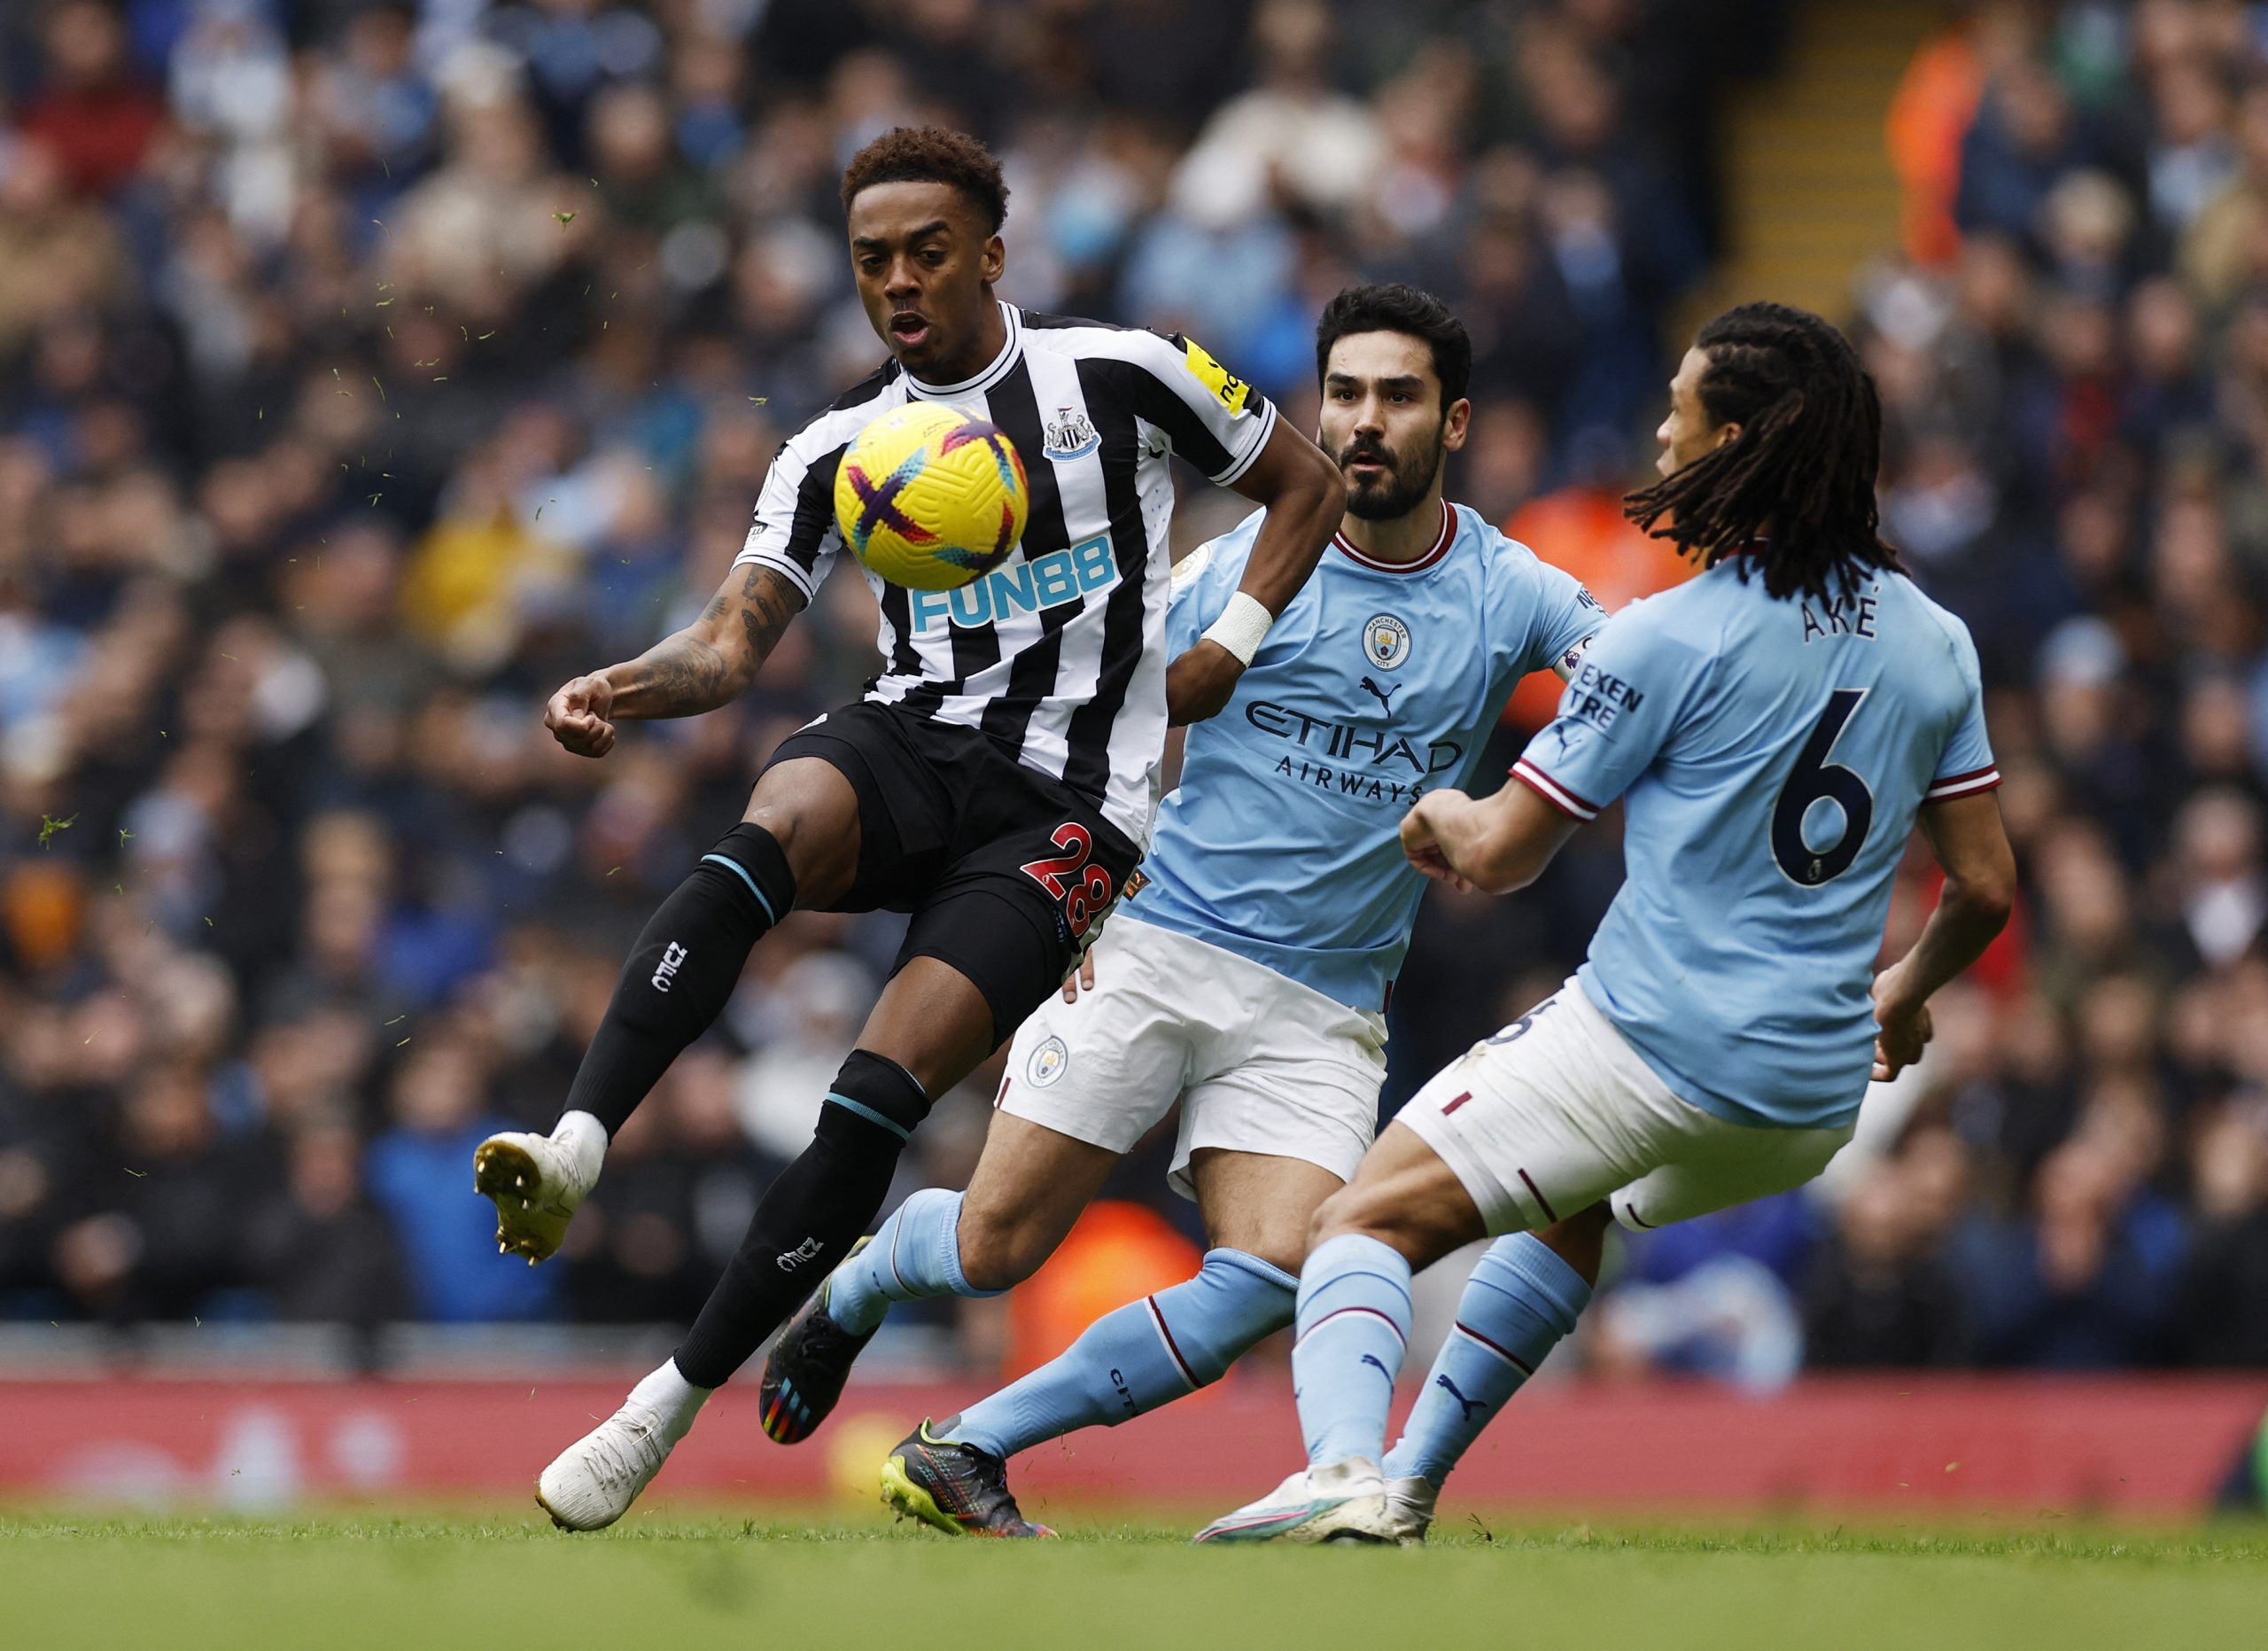 Soccer Football - Premier League - Manchester City v Newcastle United - Etihad Stadium, Manchester, Britain - March 4, 2023 Newcastle United's Joe Willock in action with Manchester City's Ilkay Gundogan and Nathan Ake Action Images via Reuters/Jason Cairnduff EDITORIAL USE ONLY. No use with unauthorized audio, video, data, fixture lists, club/league logos or 'live' services. Online in-match use limited to 75 images, no video emulation. No use in betting, games or single club /league/player publi